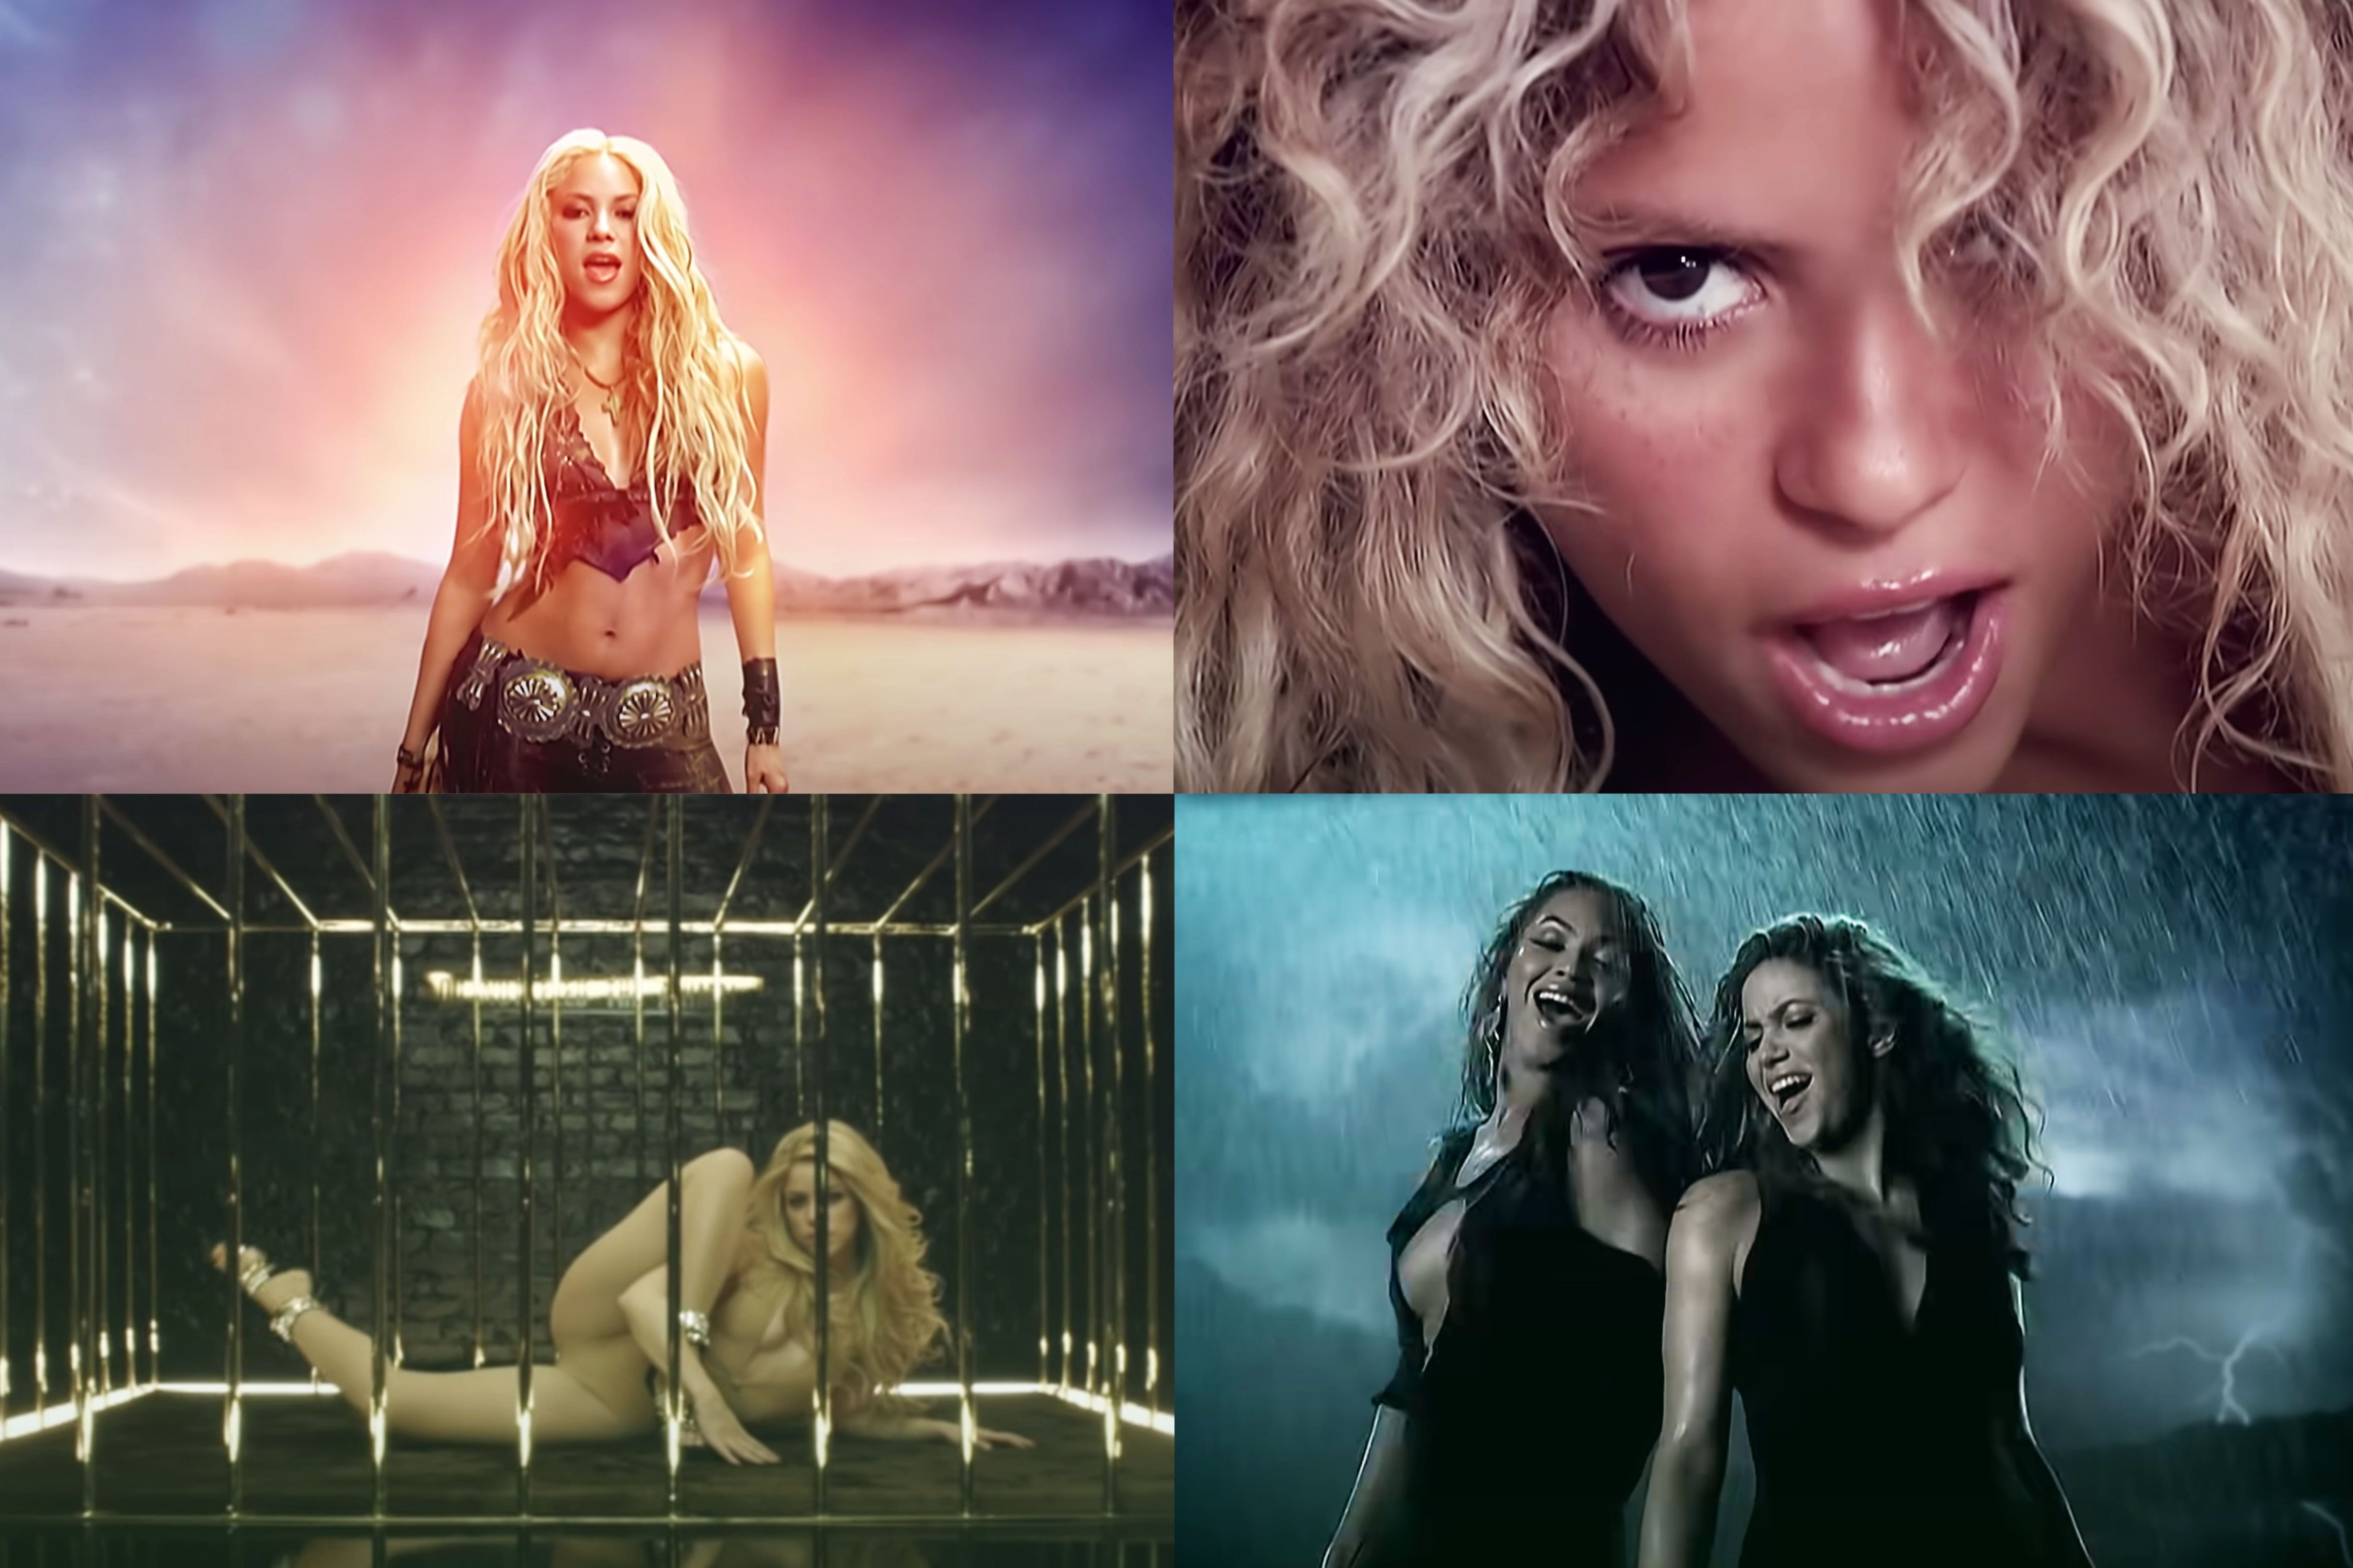 Clockwise: Whenever Wherever, La Tortura, She Wolf and Beautiful Liar  (YouTube (4))